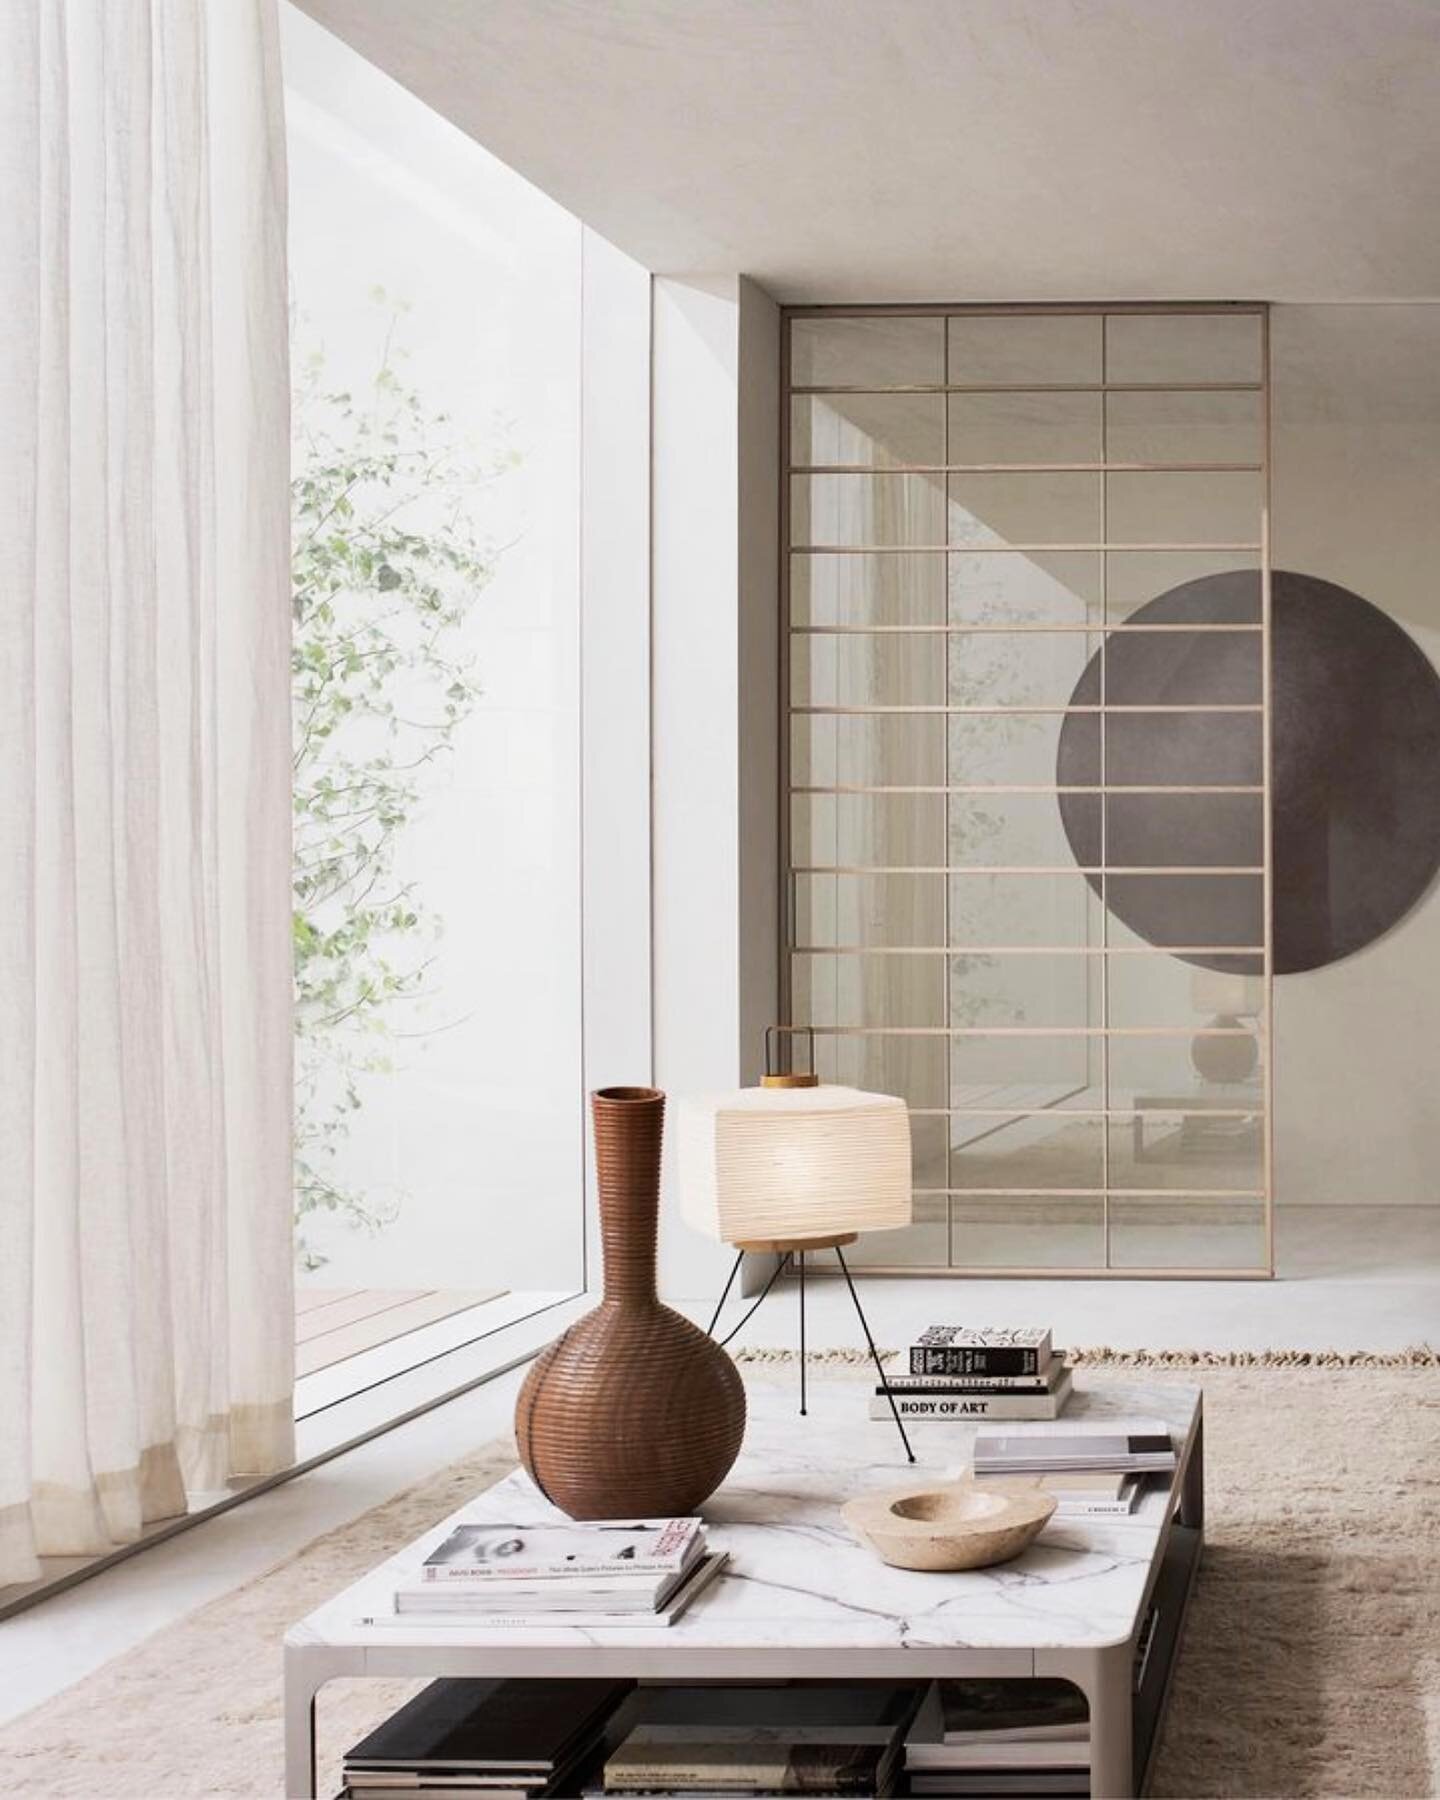 HEART OF GLASS
Soho, Rimadesio&rsquo;s collection of sliding panels inspired by the timeless elegance of Japanese home dividers.

design @giuseppebavusodesign 

#slidingdoor #slidingpanel #roomdivider #homedesign #homeinspo #homedecor #homeinspiratio